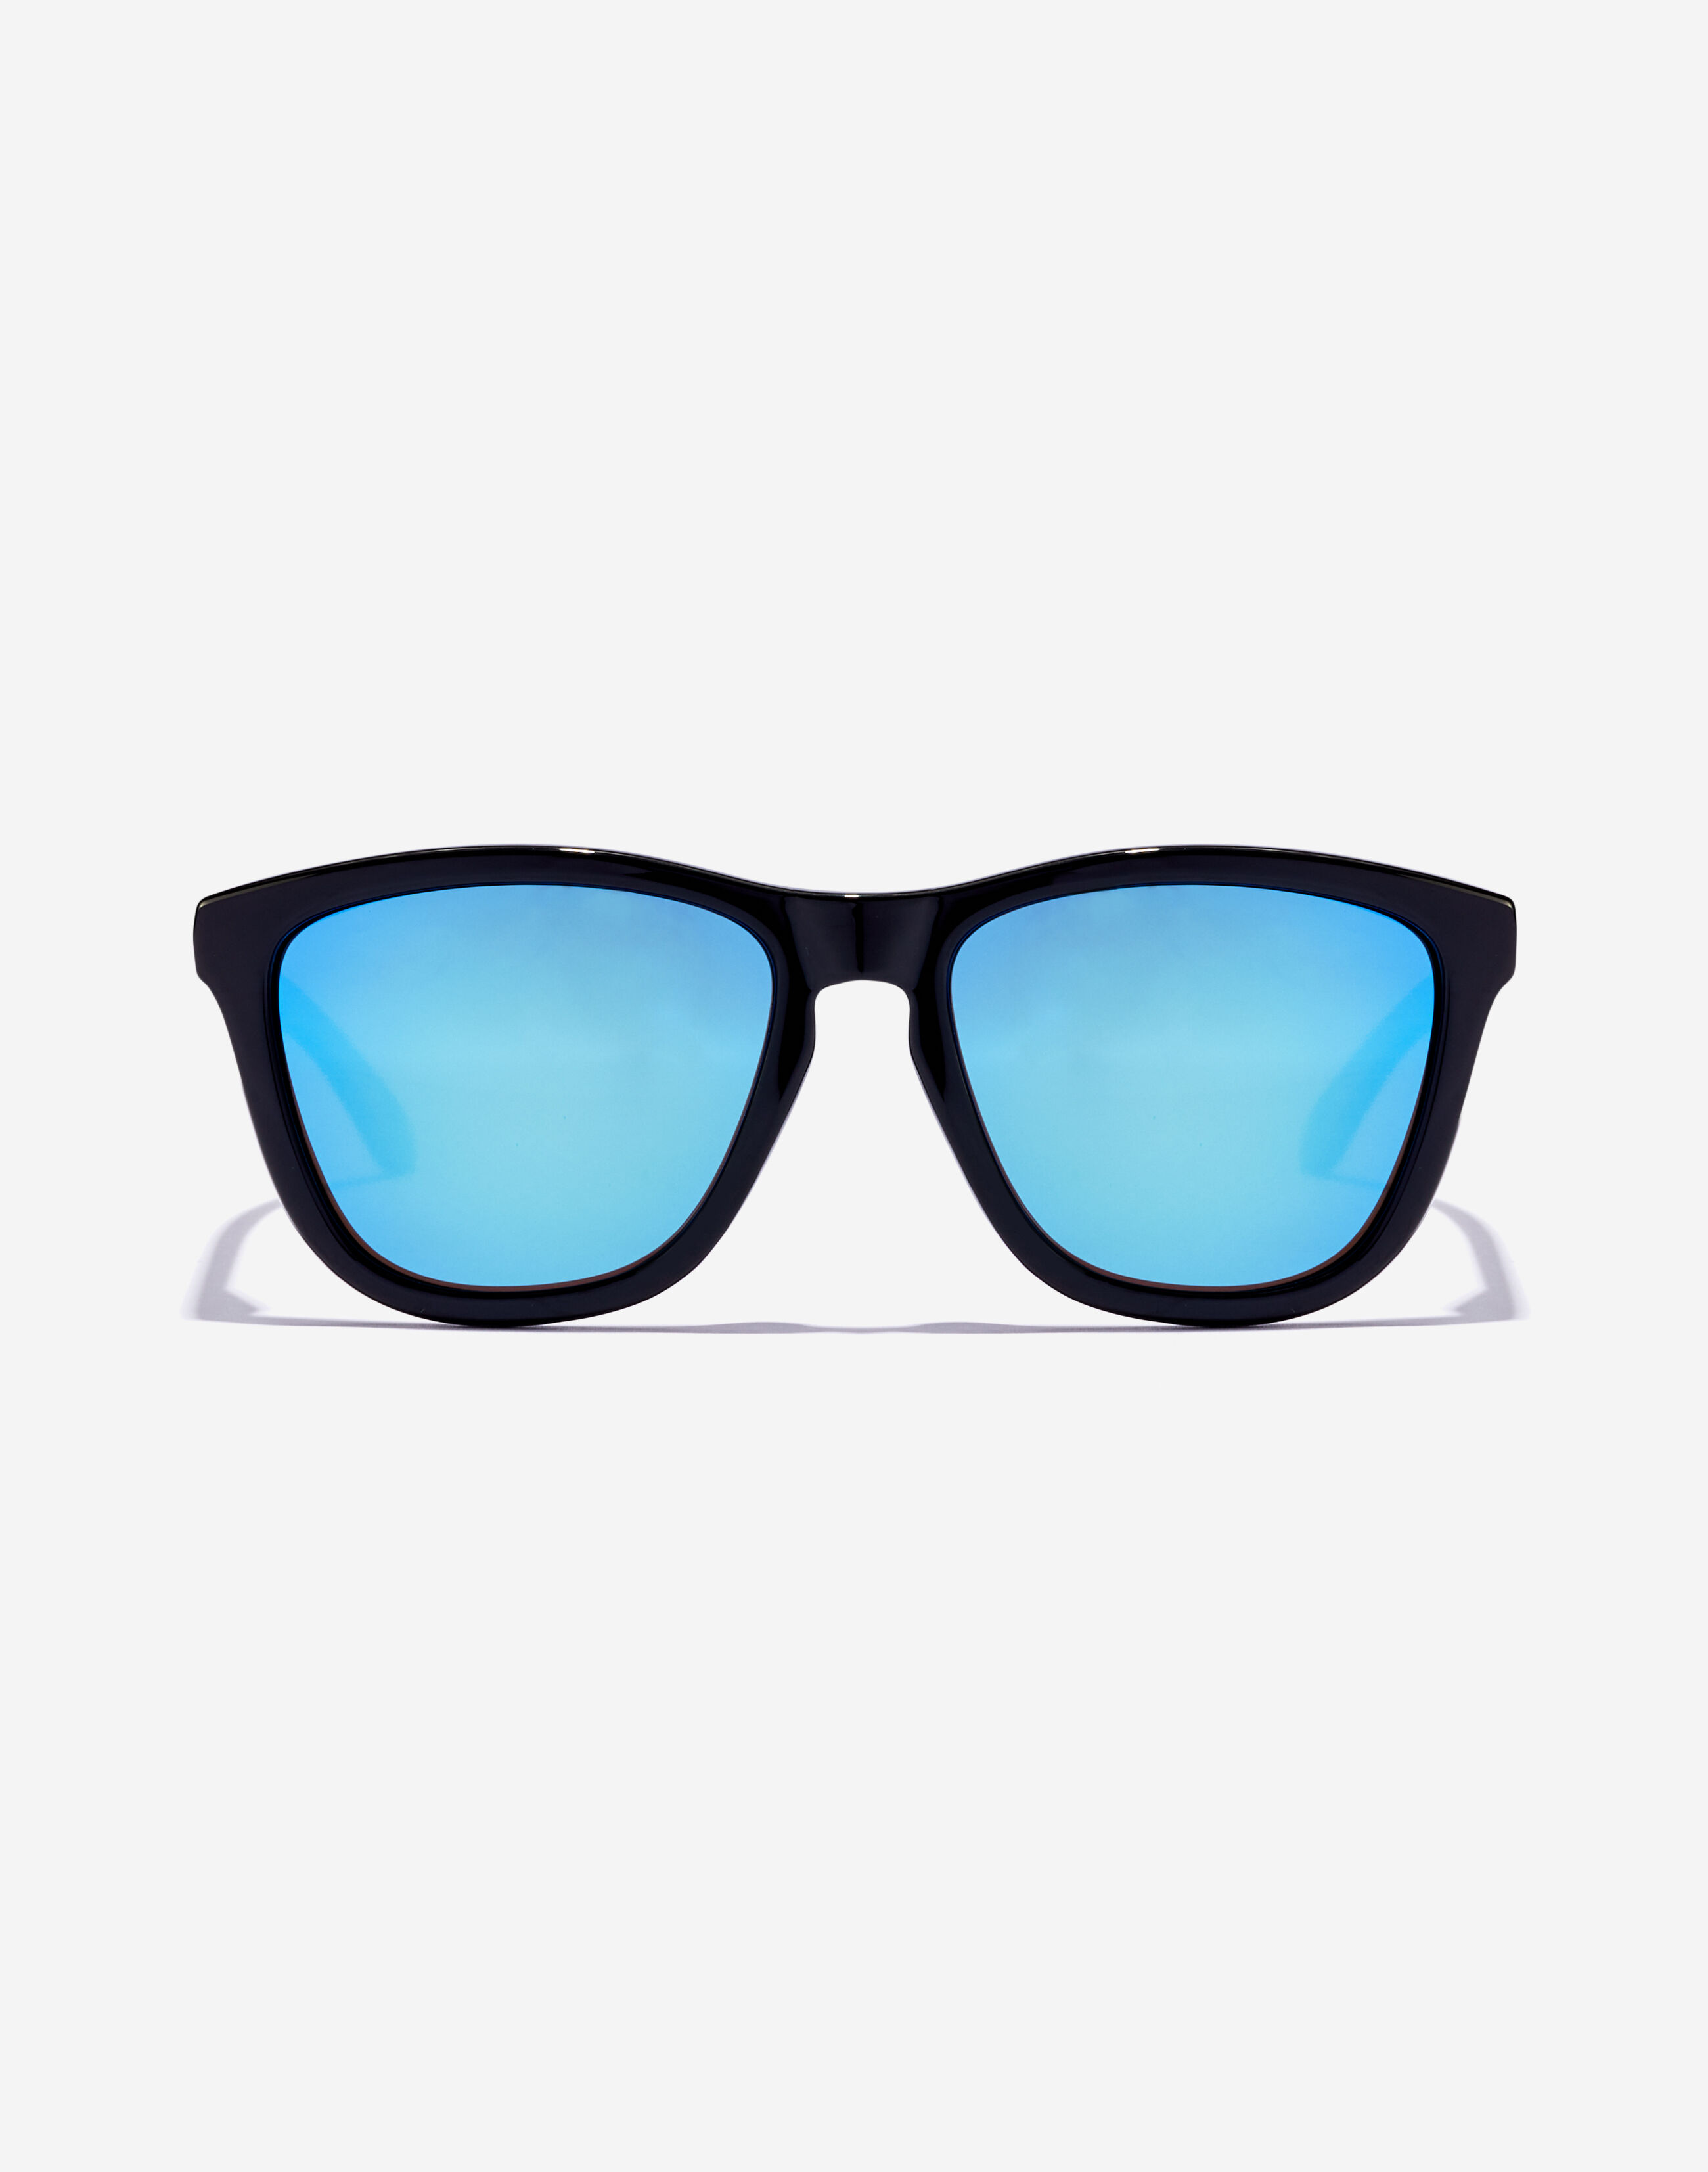 HAWKERS · ONE S · Sunglasses for men and women 